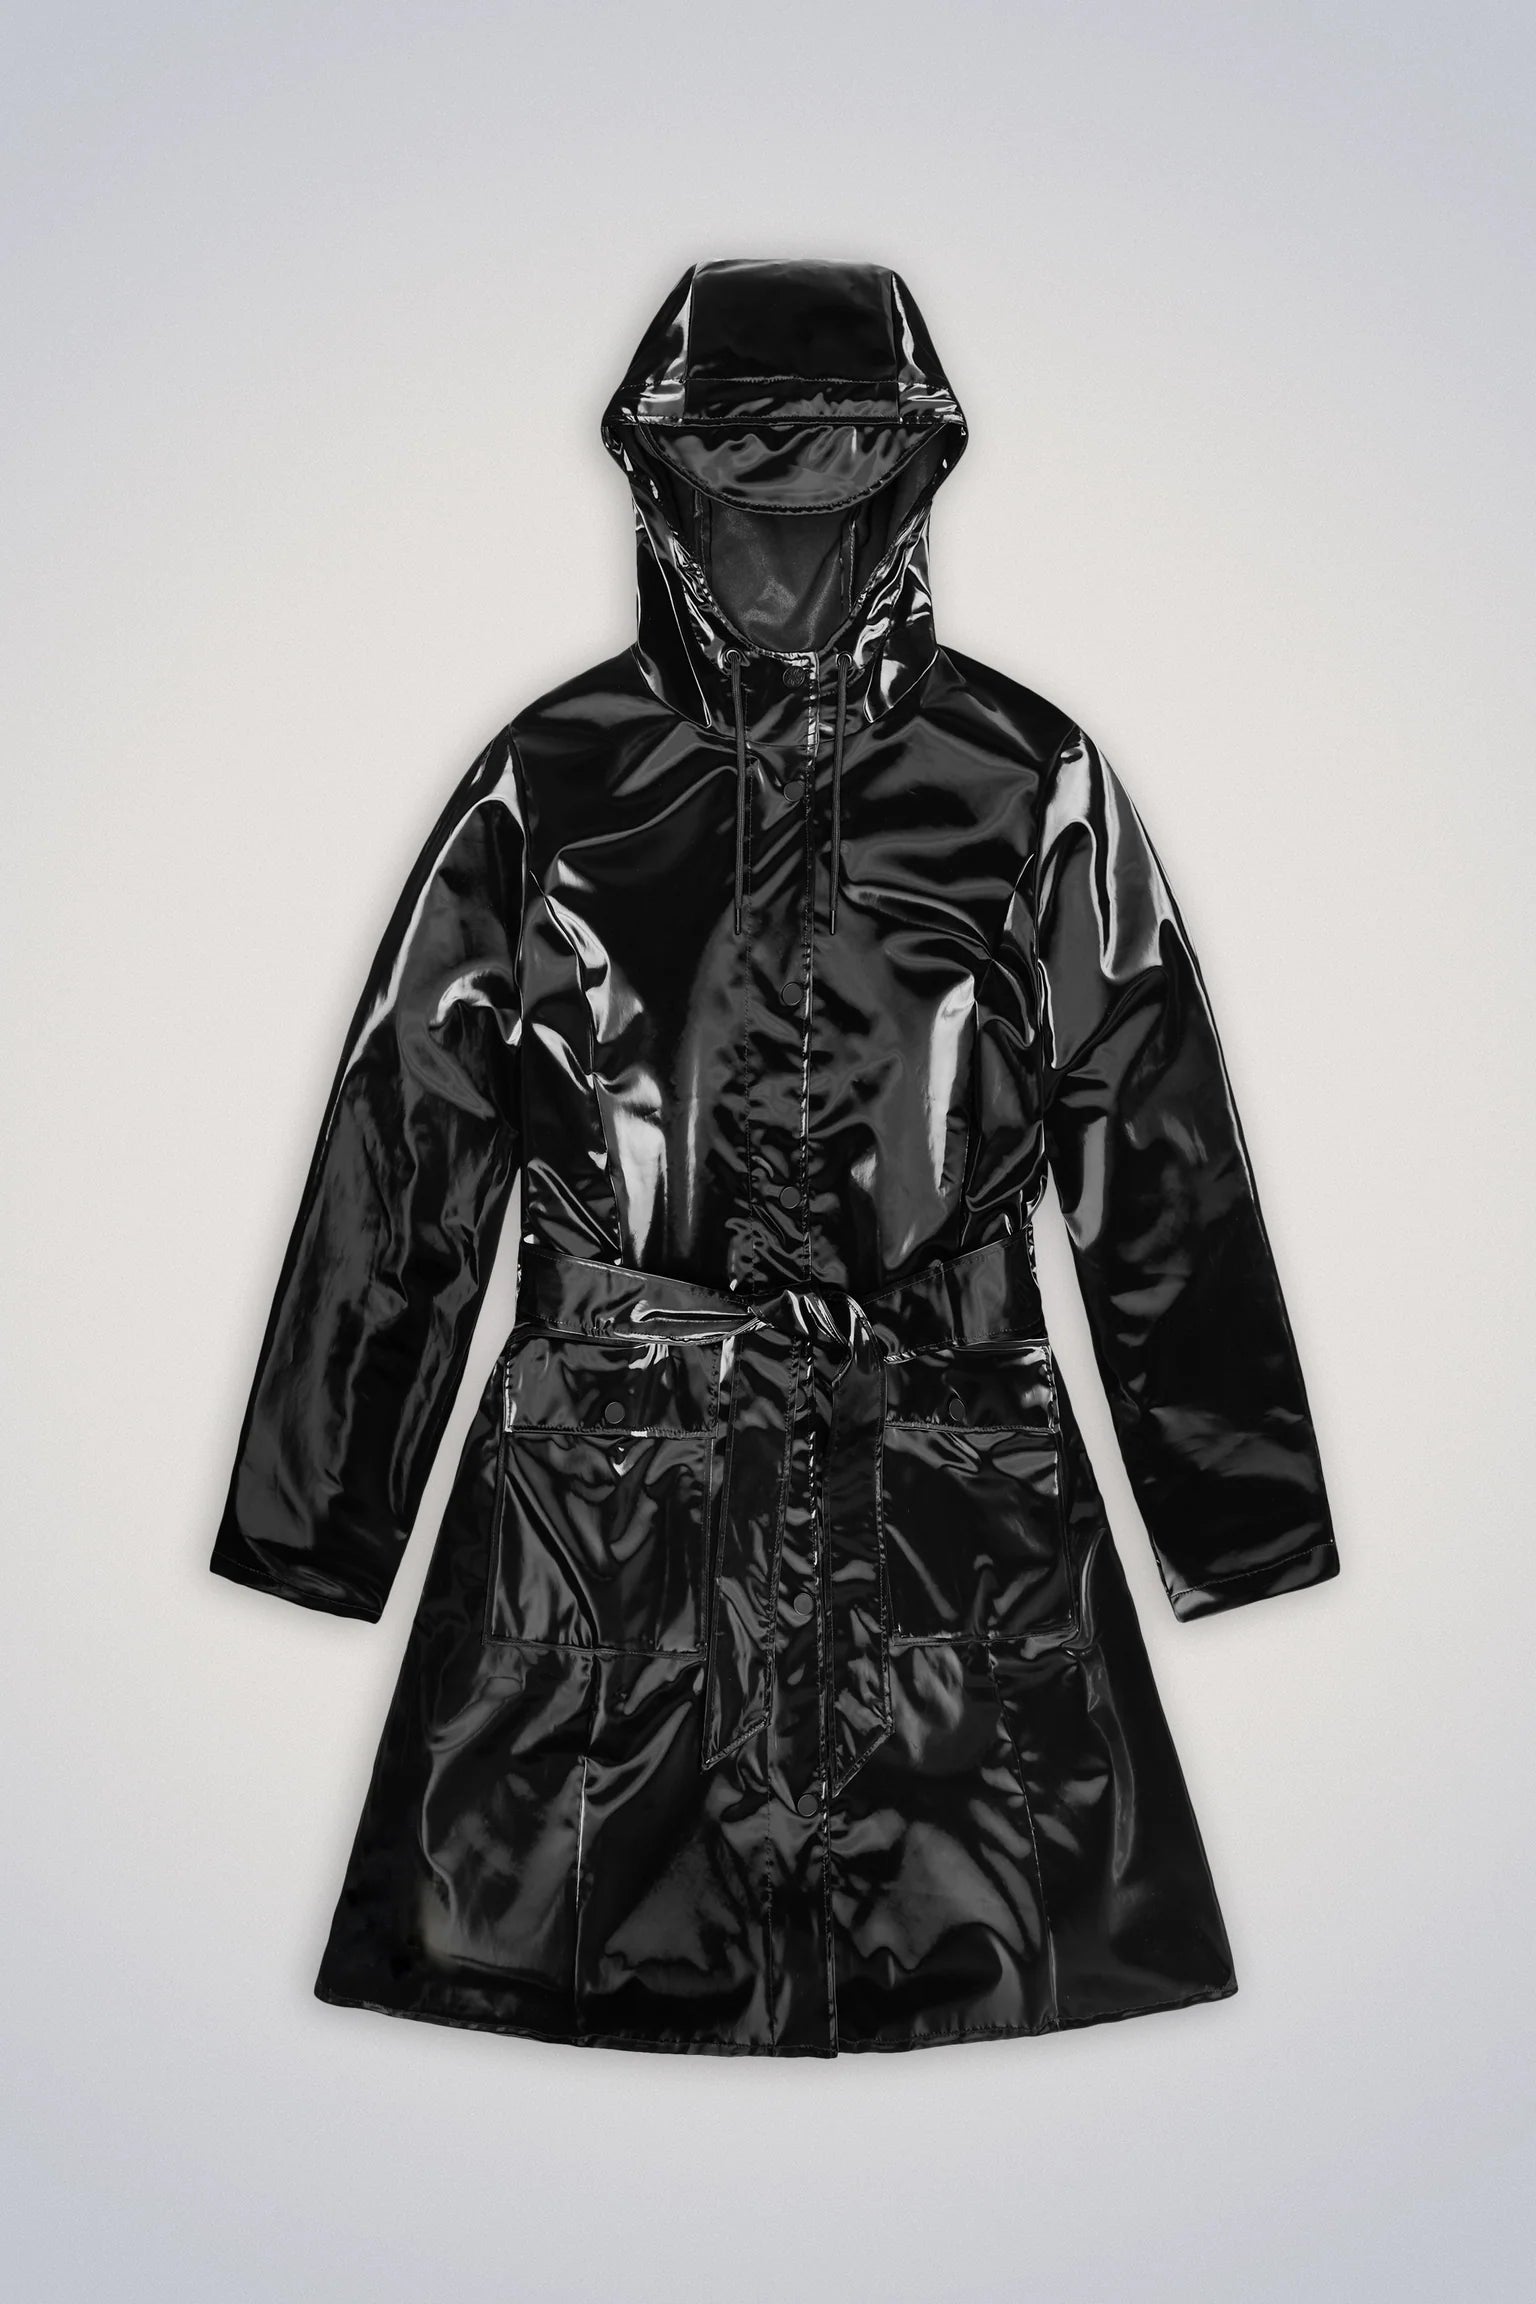 A waterproof black Curve W Jacket - Night raincoat with an adjustable hood and adjustable cuffs, on a white background. (Brand Name: Rains)